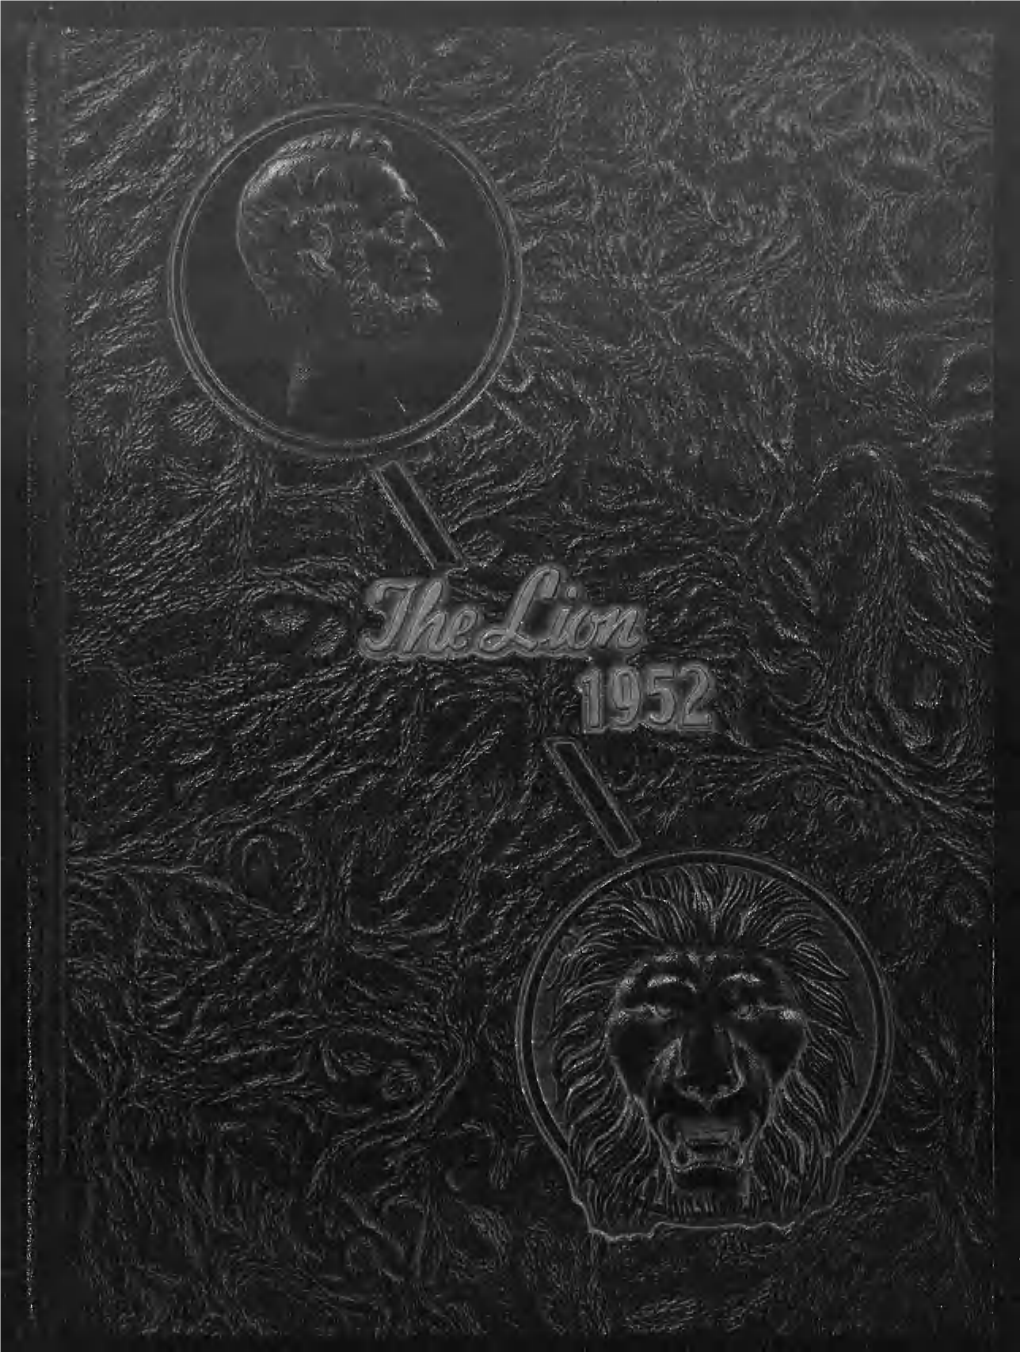 Yearbook 1952.Pdf